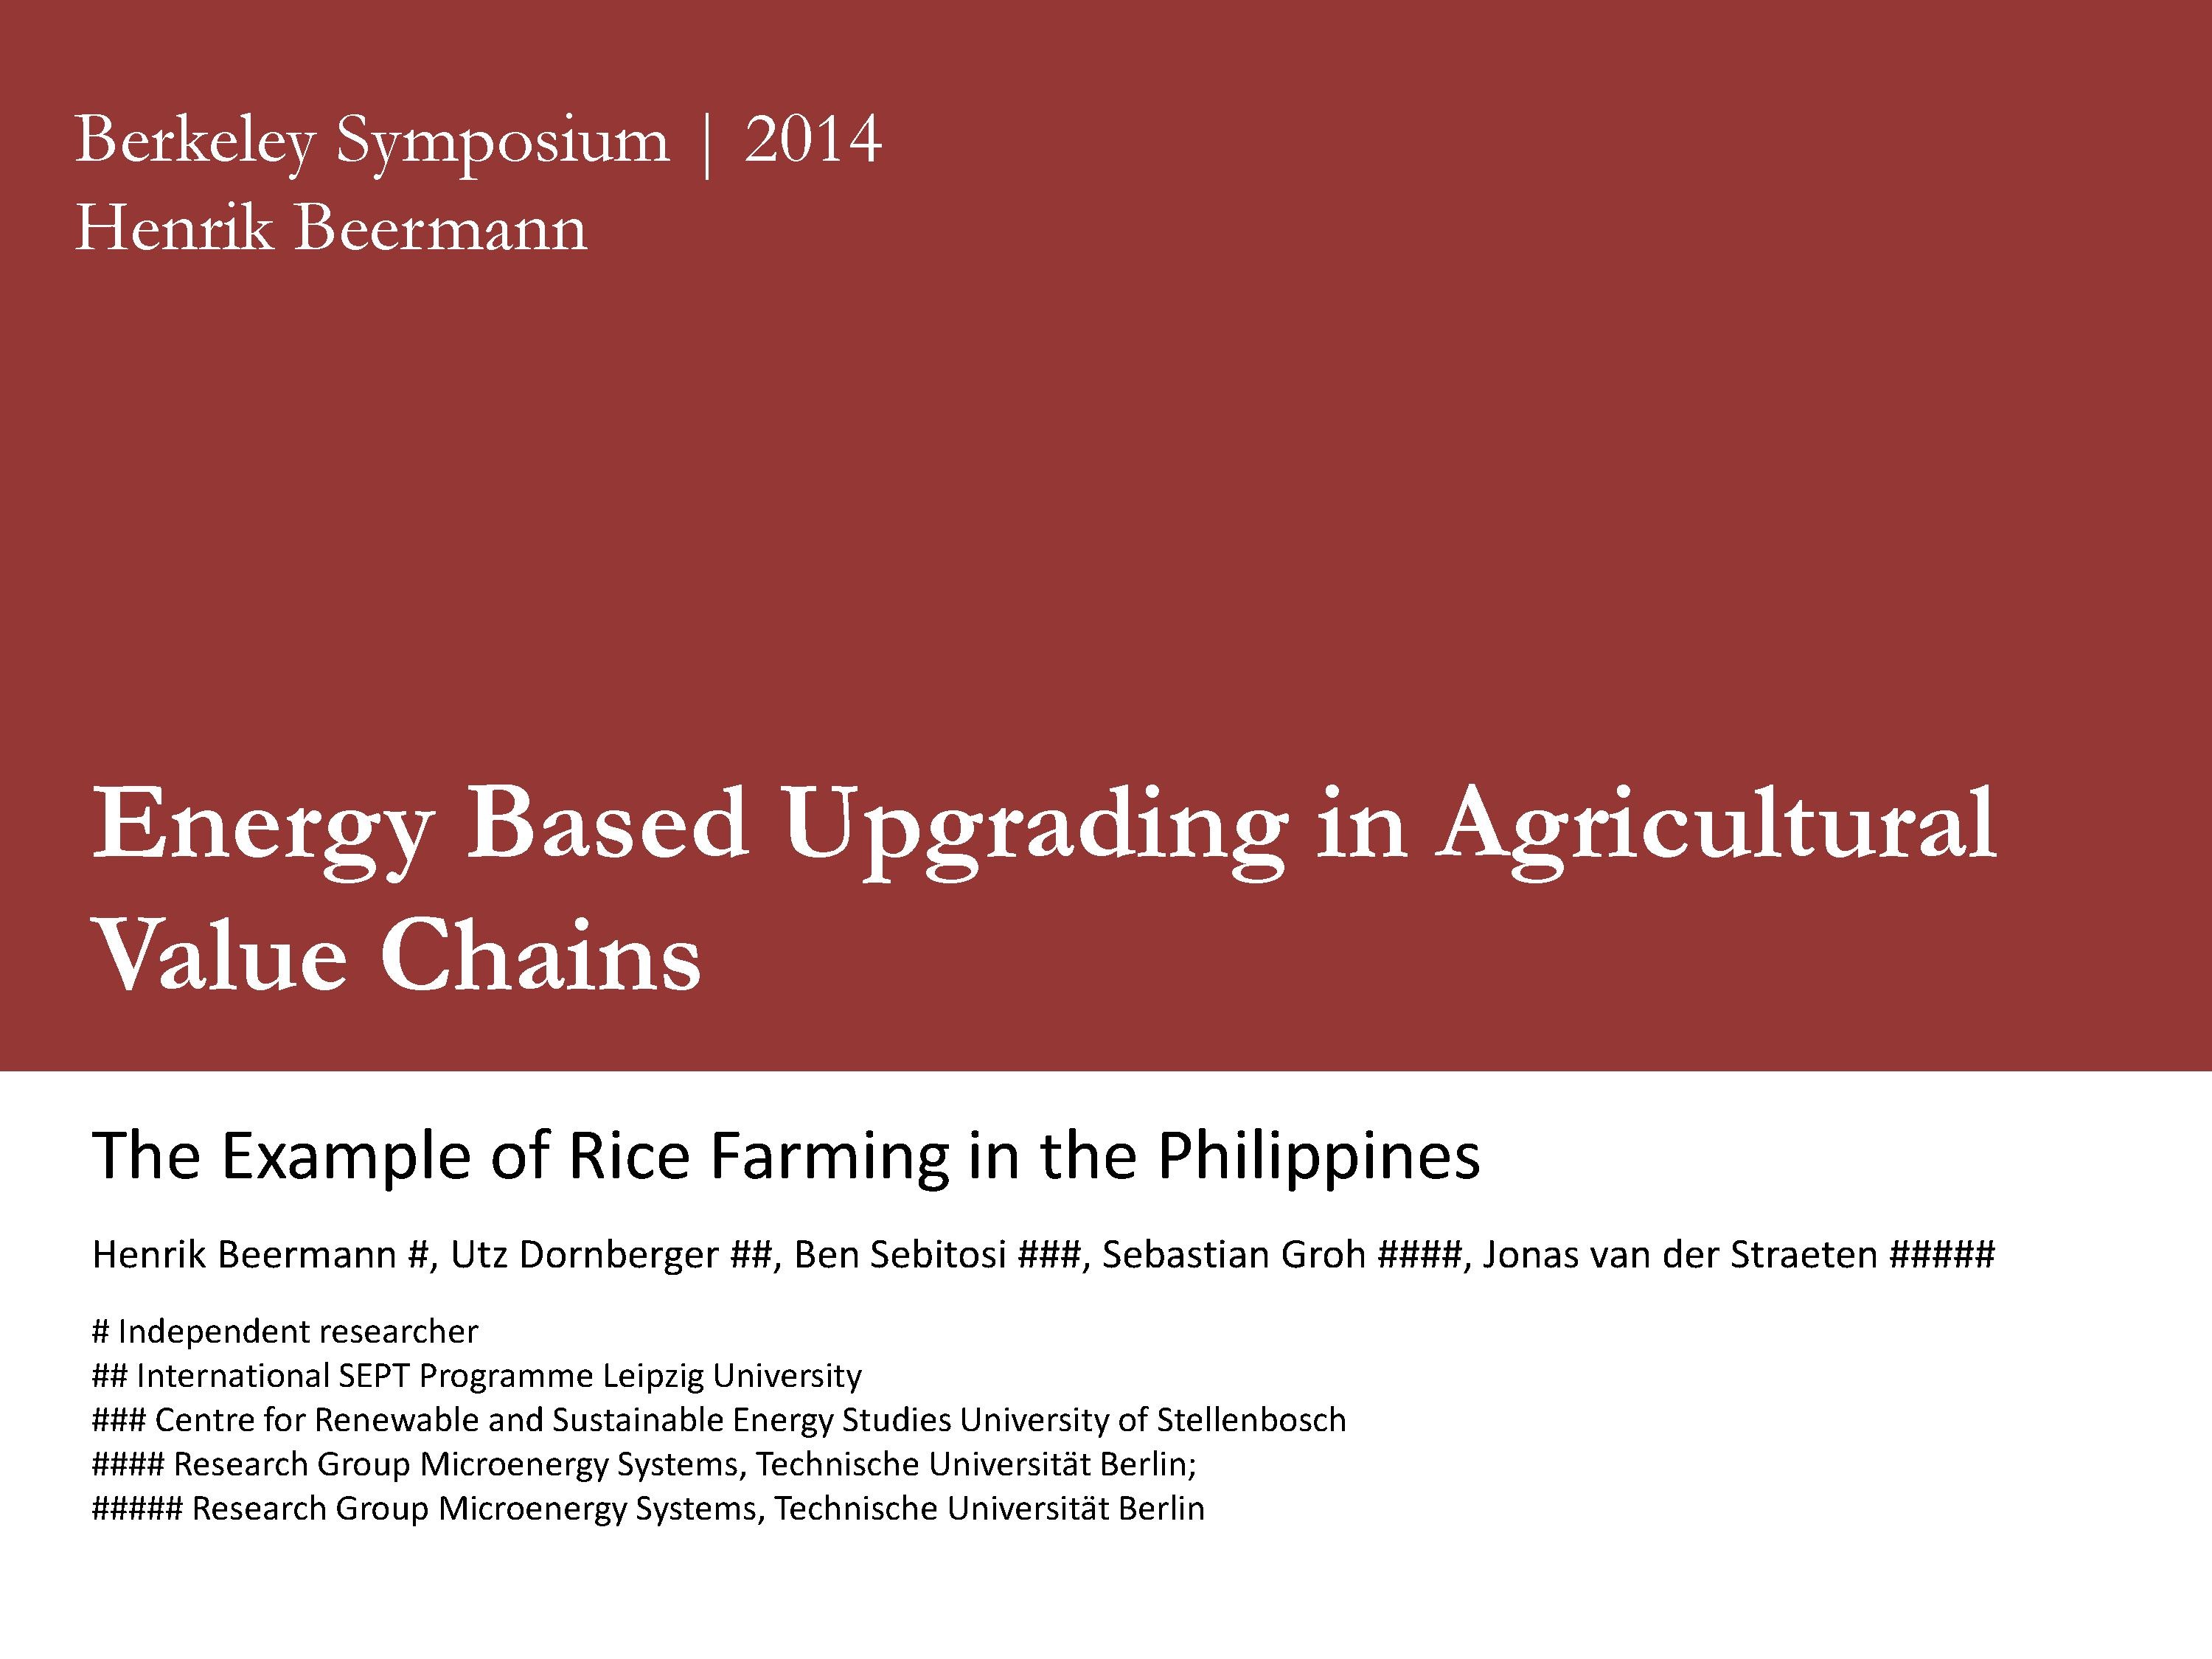 https://energypedia.info/wiki/File:Value_Chain_Thinking_and_Energy_Projects_A_Problem_Centred_Value_Chain_Approach_to_Energy_Based_Upgrading_of_Rice_Farmers_in_the_Philippines.pdf